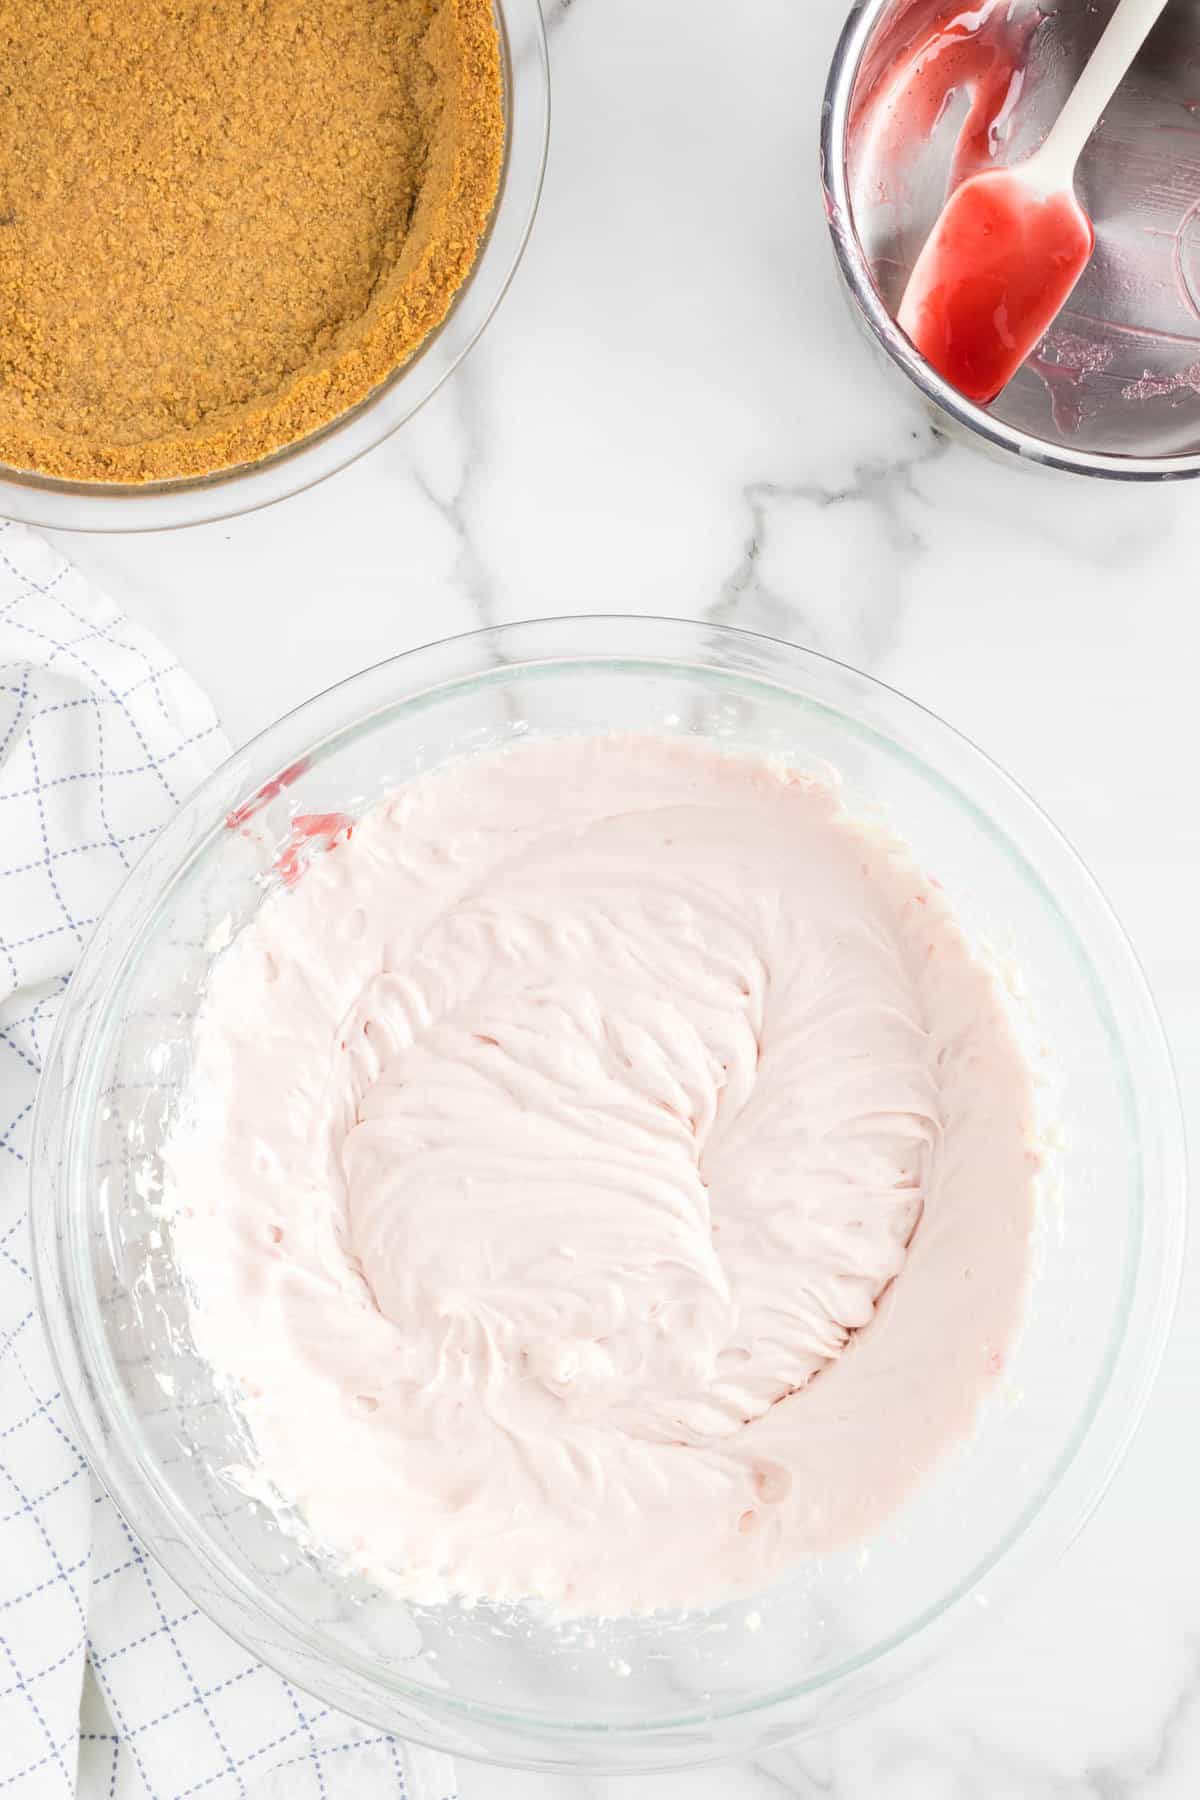 Blending Strawberries and Cream Cheese Mixture in Bowl for No Bake Strawberry Cheesecake 